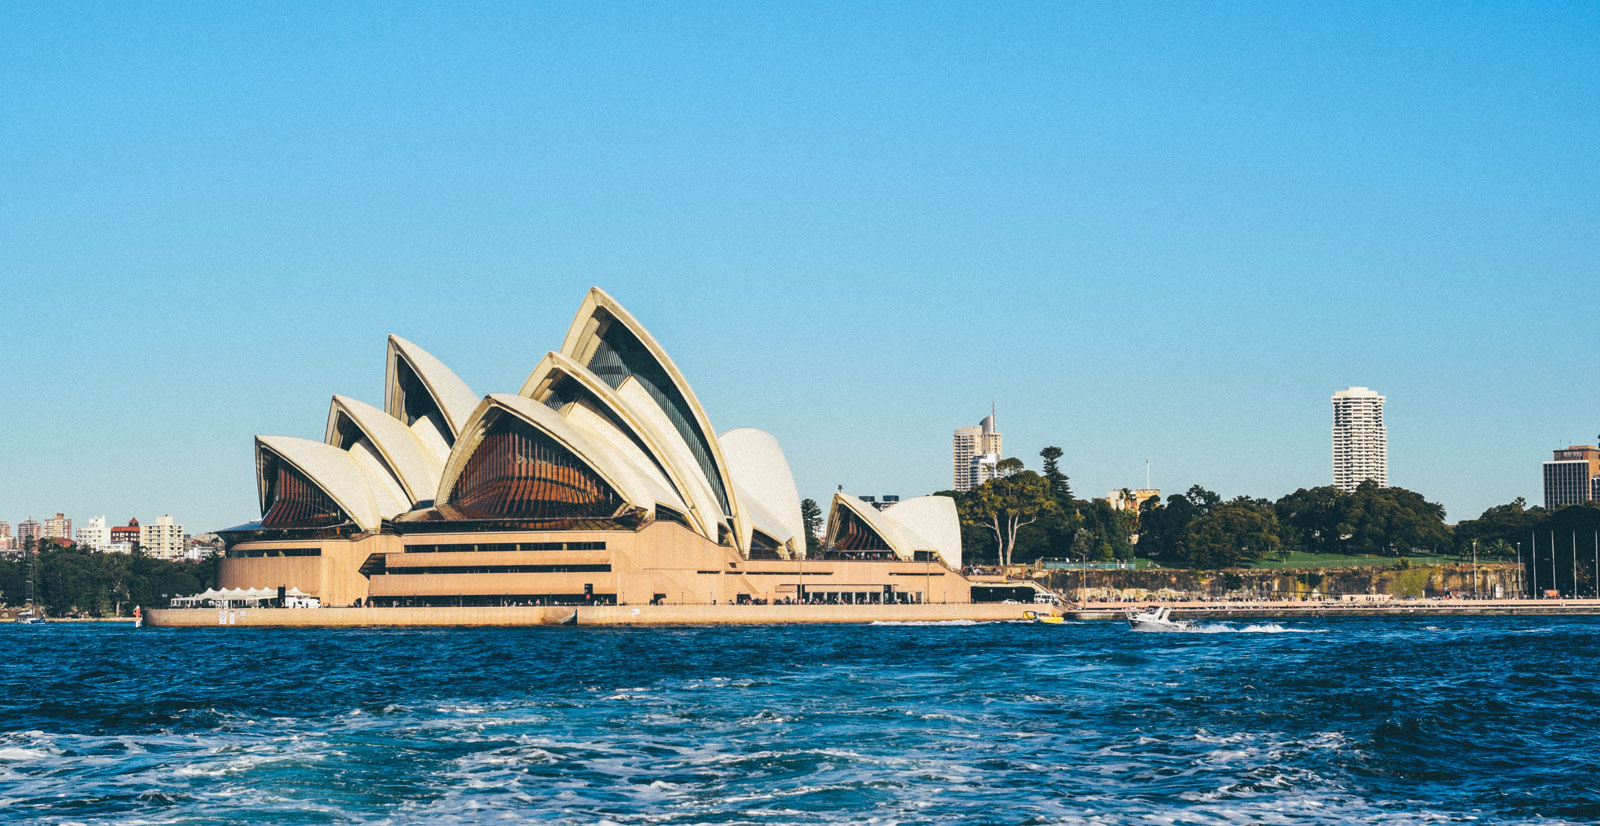 Sydney Opera House from the water